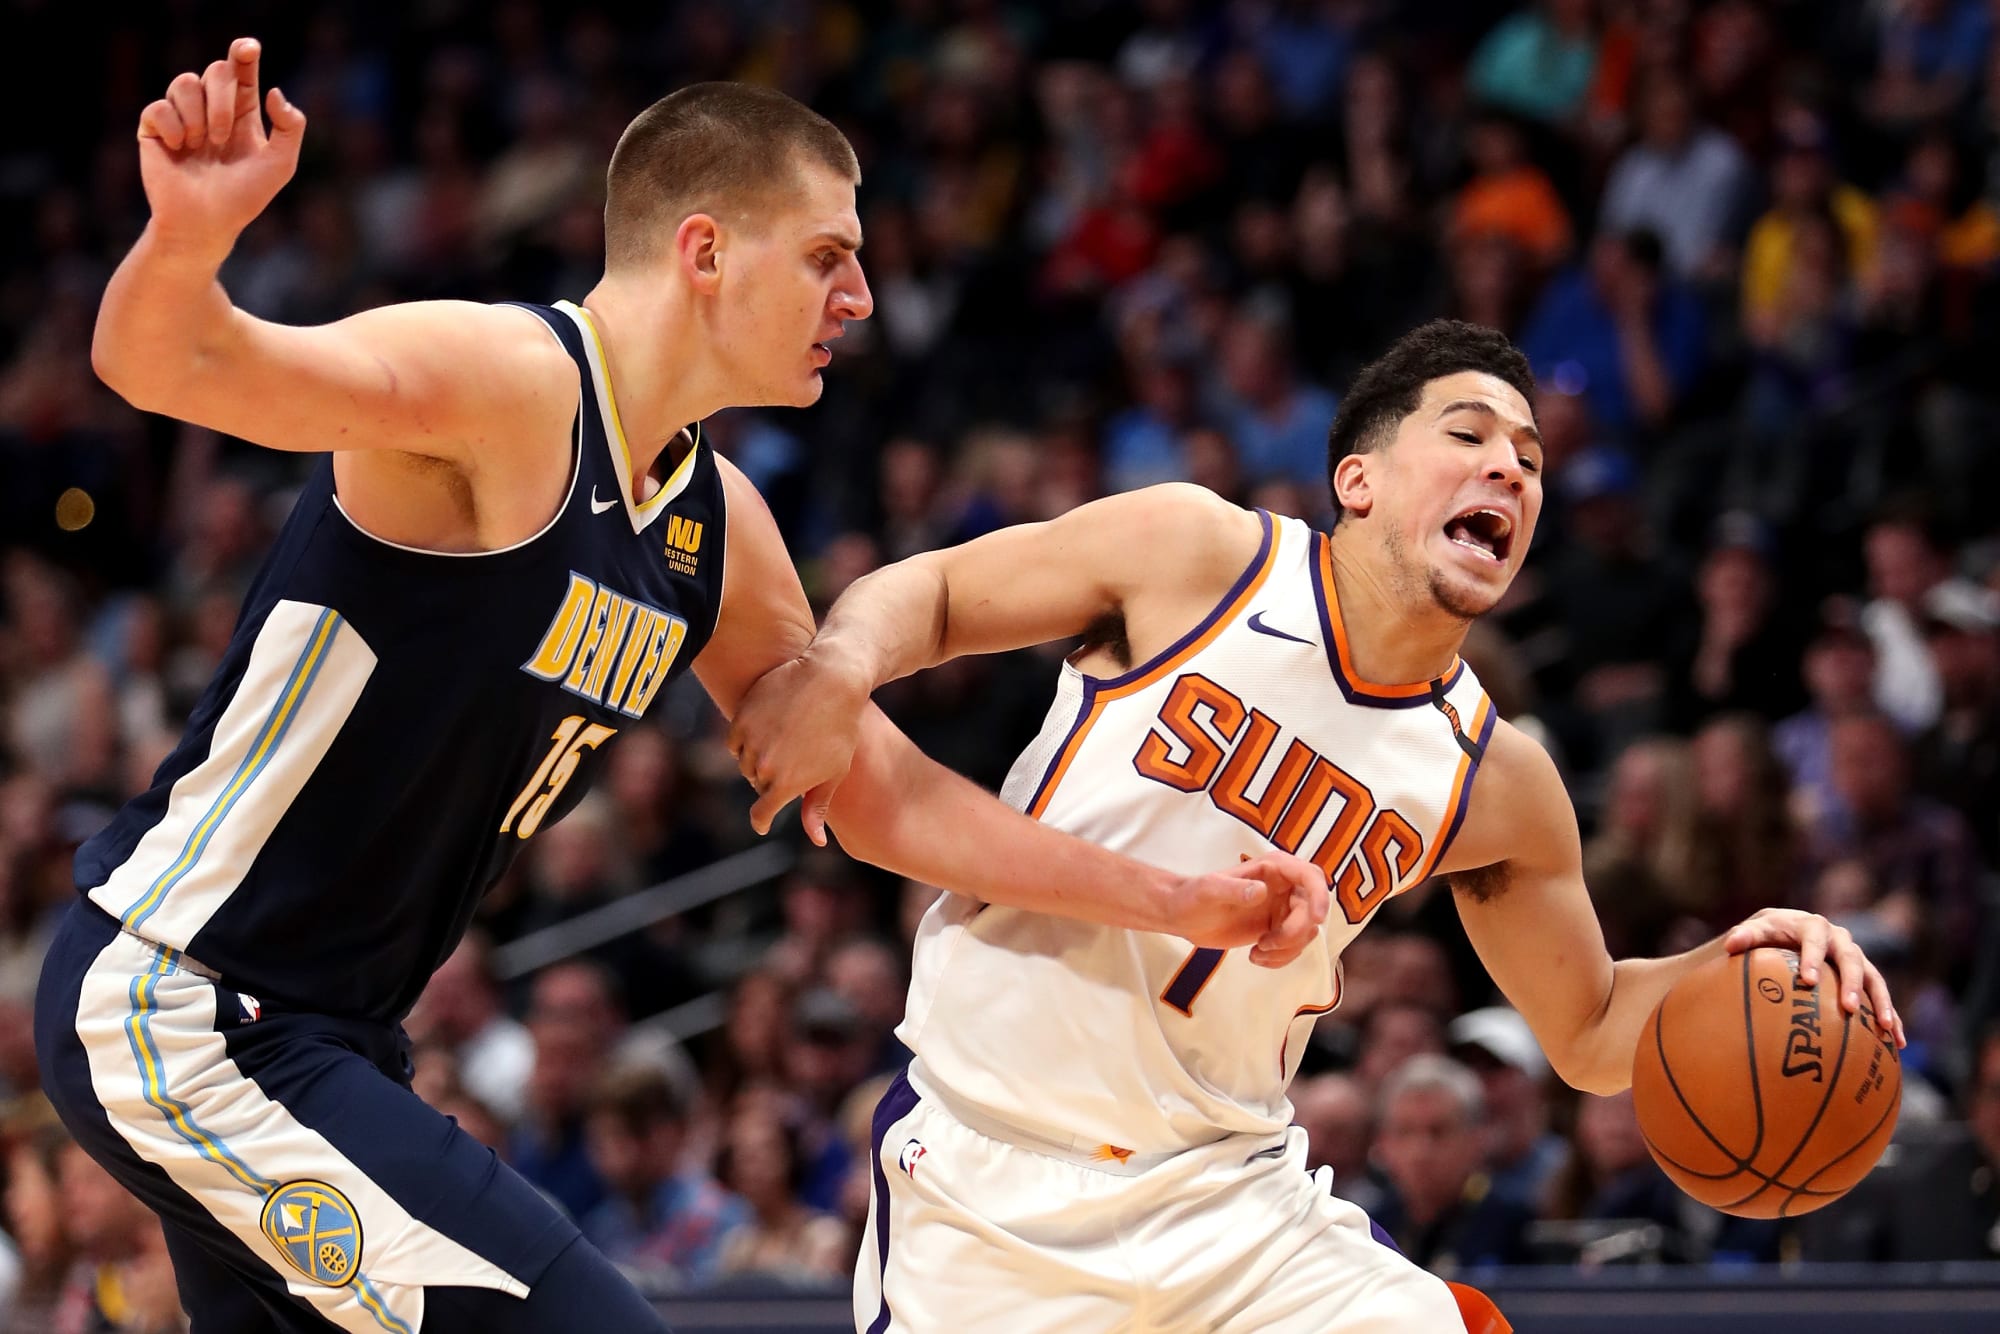 The Nuggets were outlasted by the Suns on their home court.